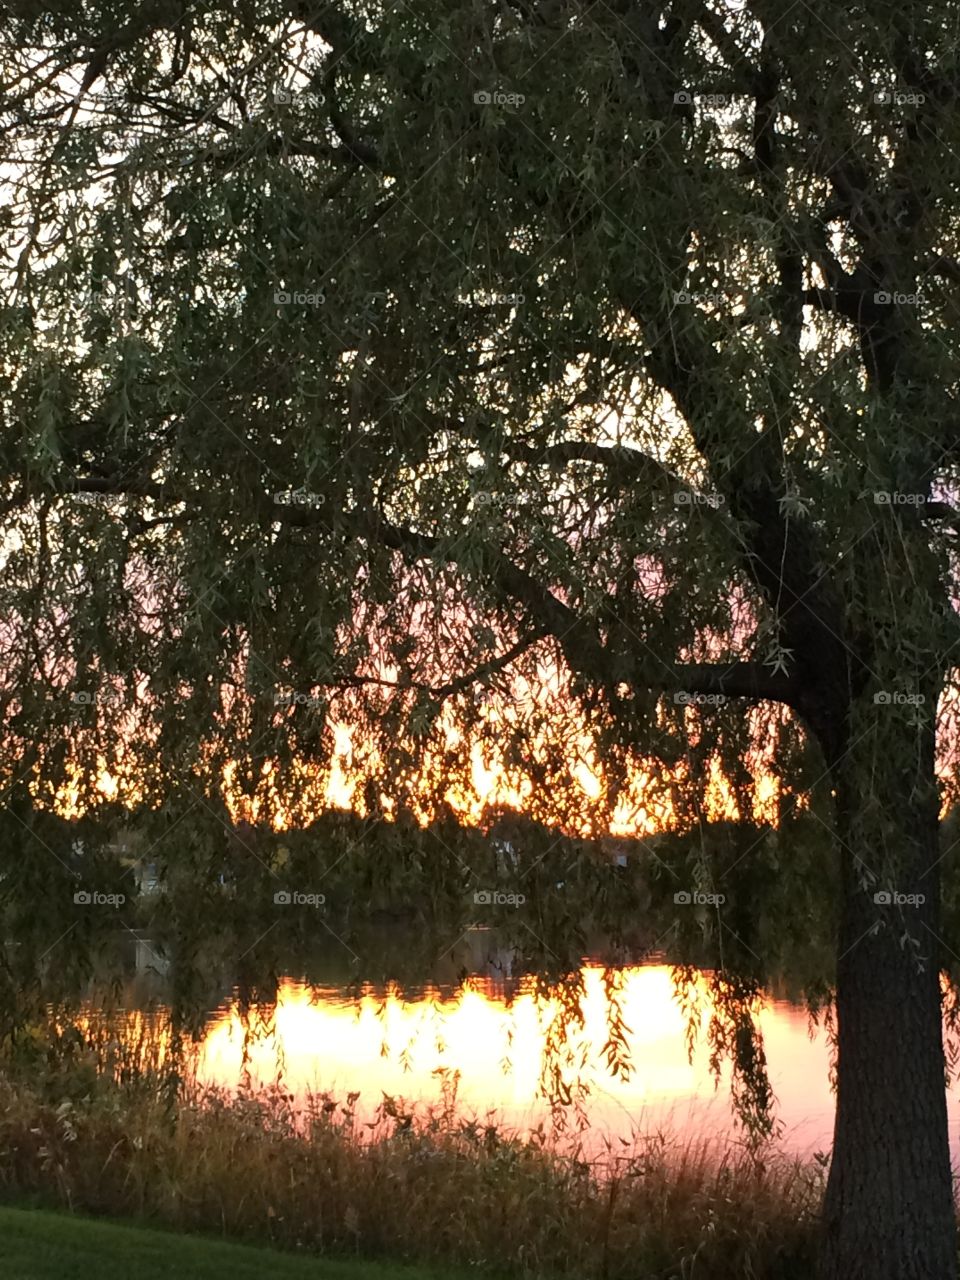 Willow tree by the lake